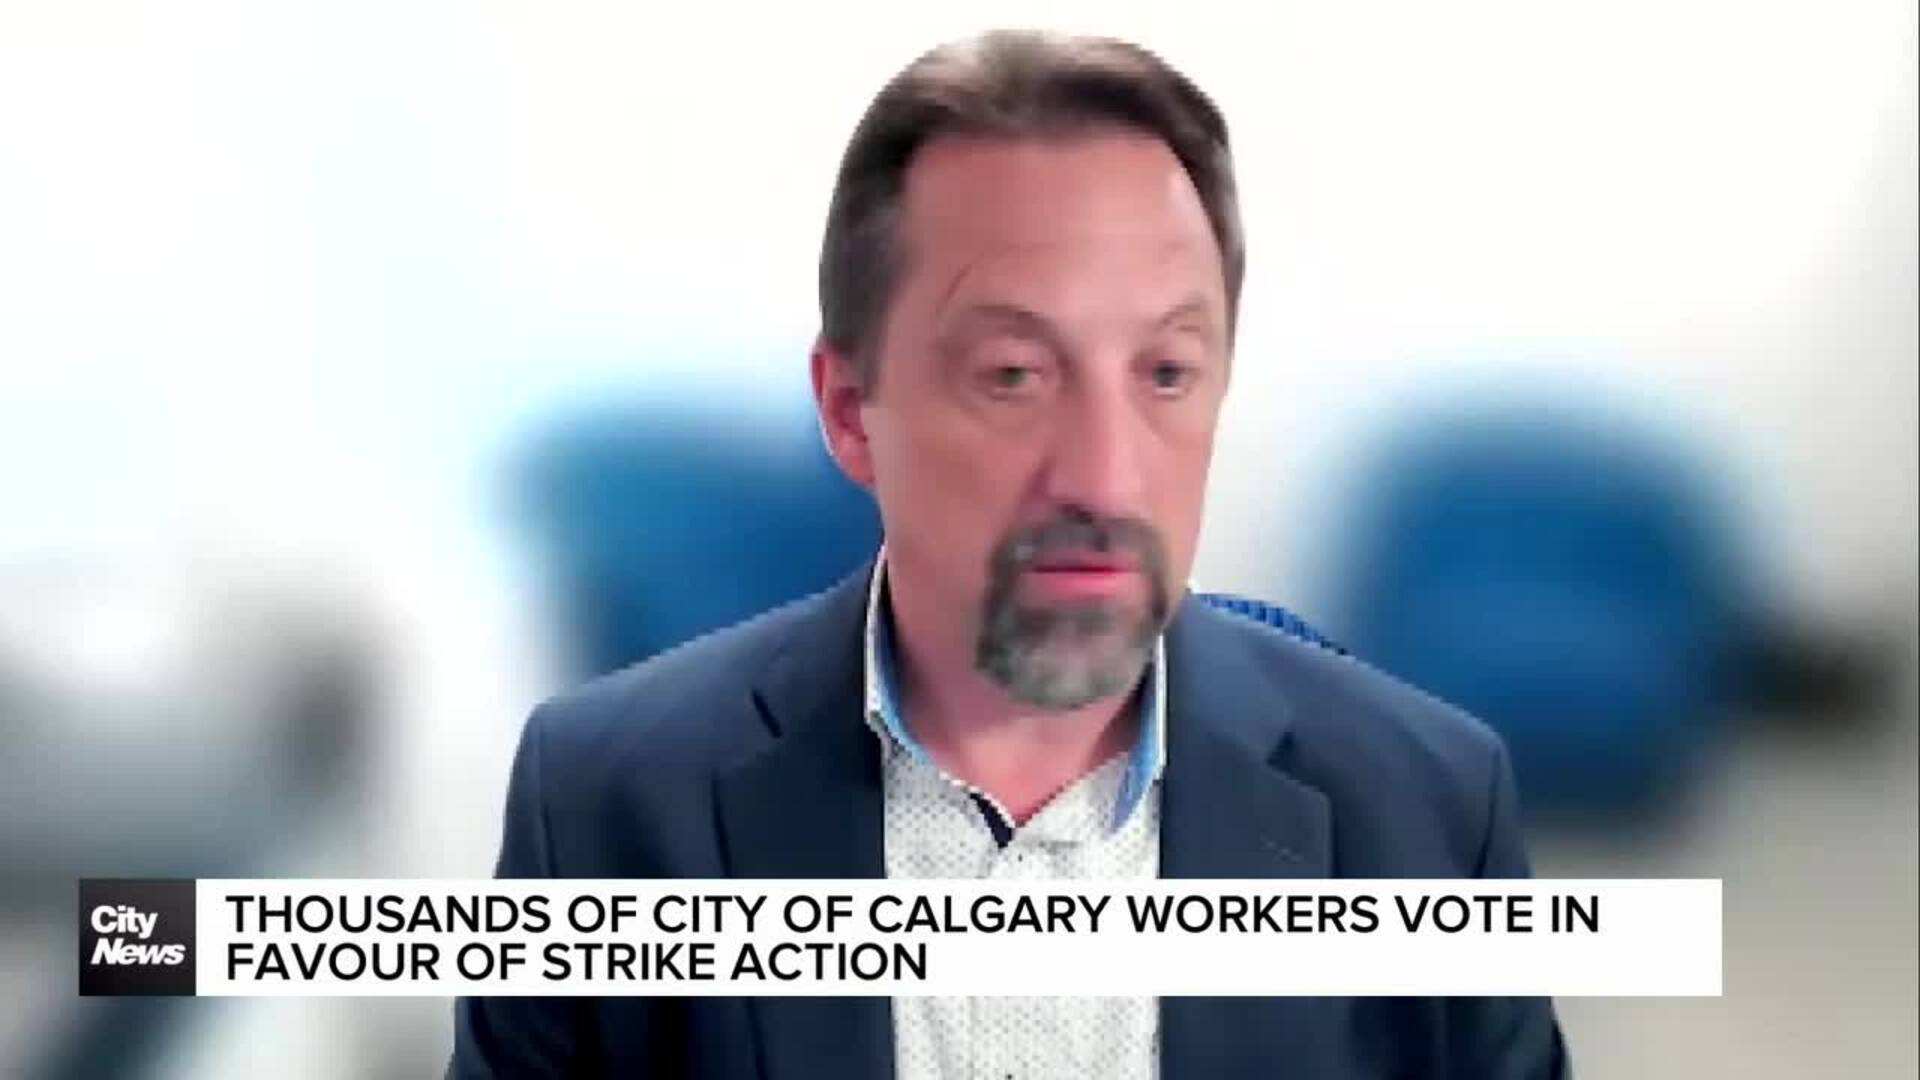 Thousands of city of Calgary workers vote in favour of strike action